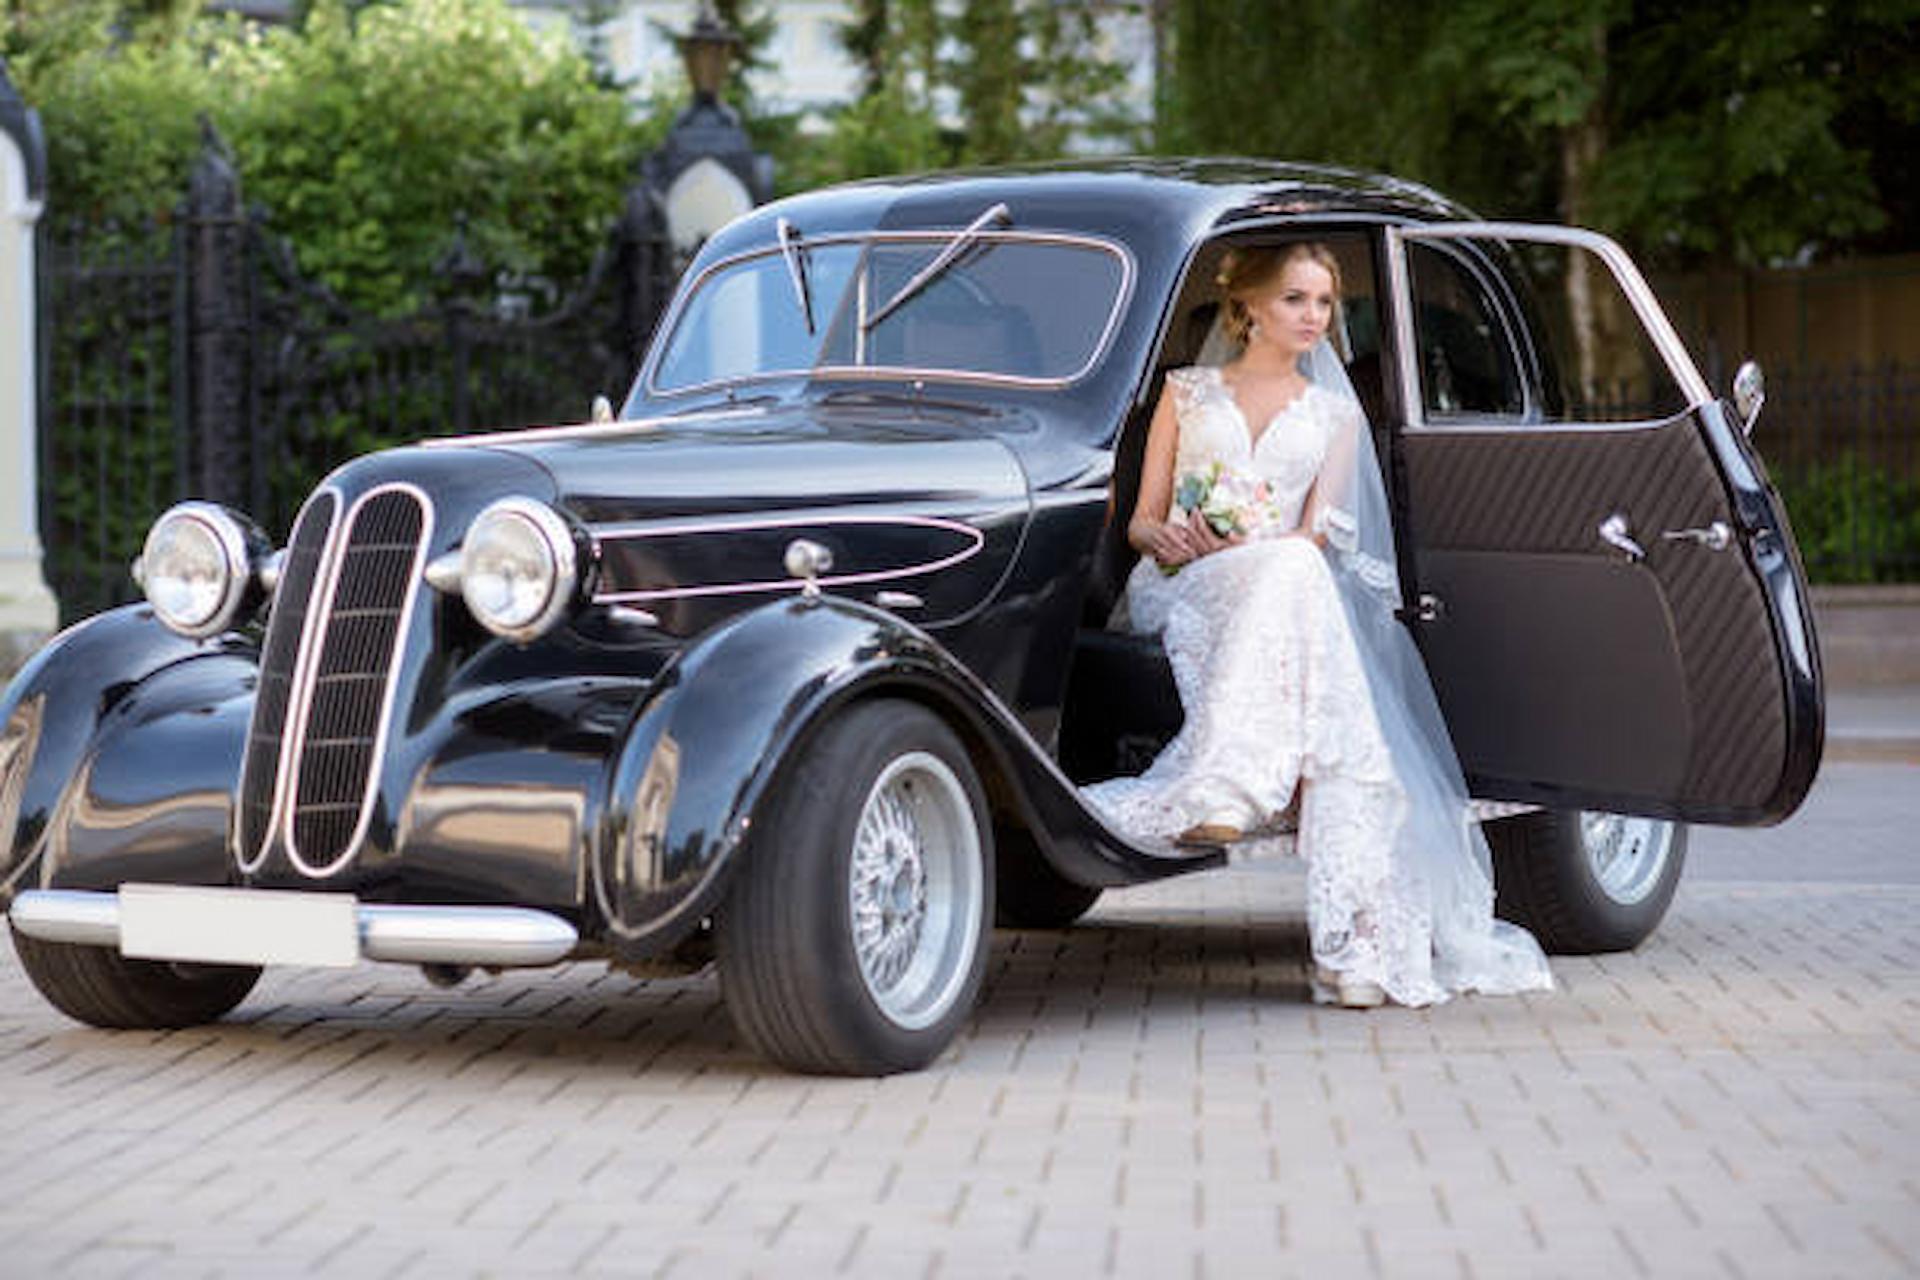 The ideal wedding cars Birmingham are the perfect start to the perfect day